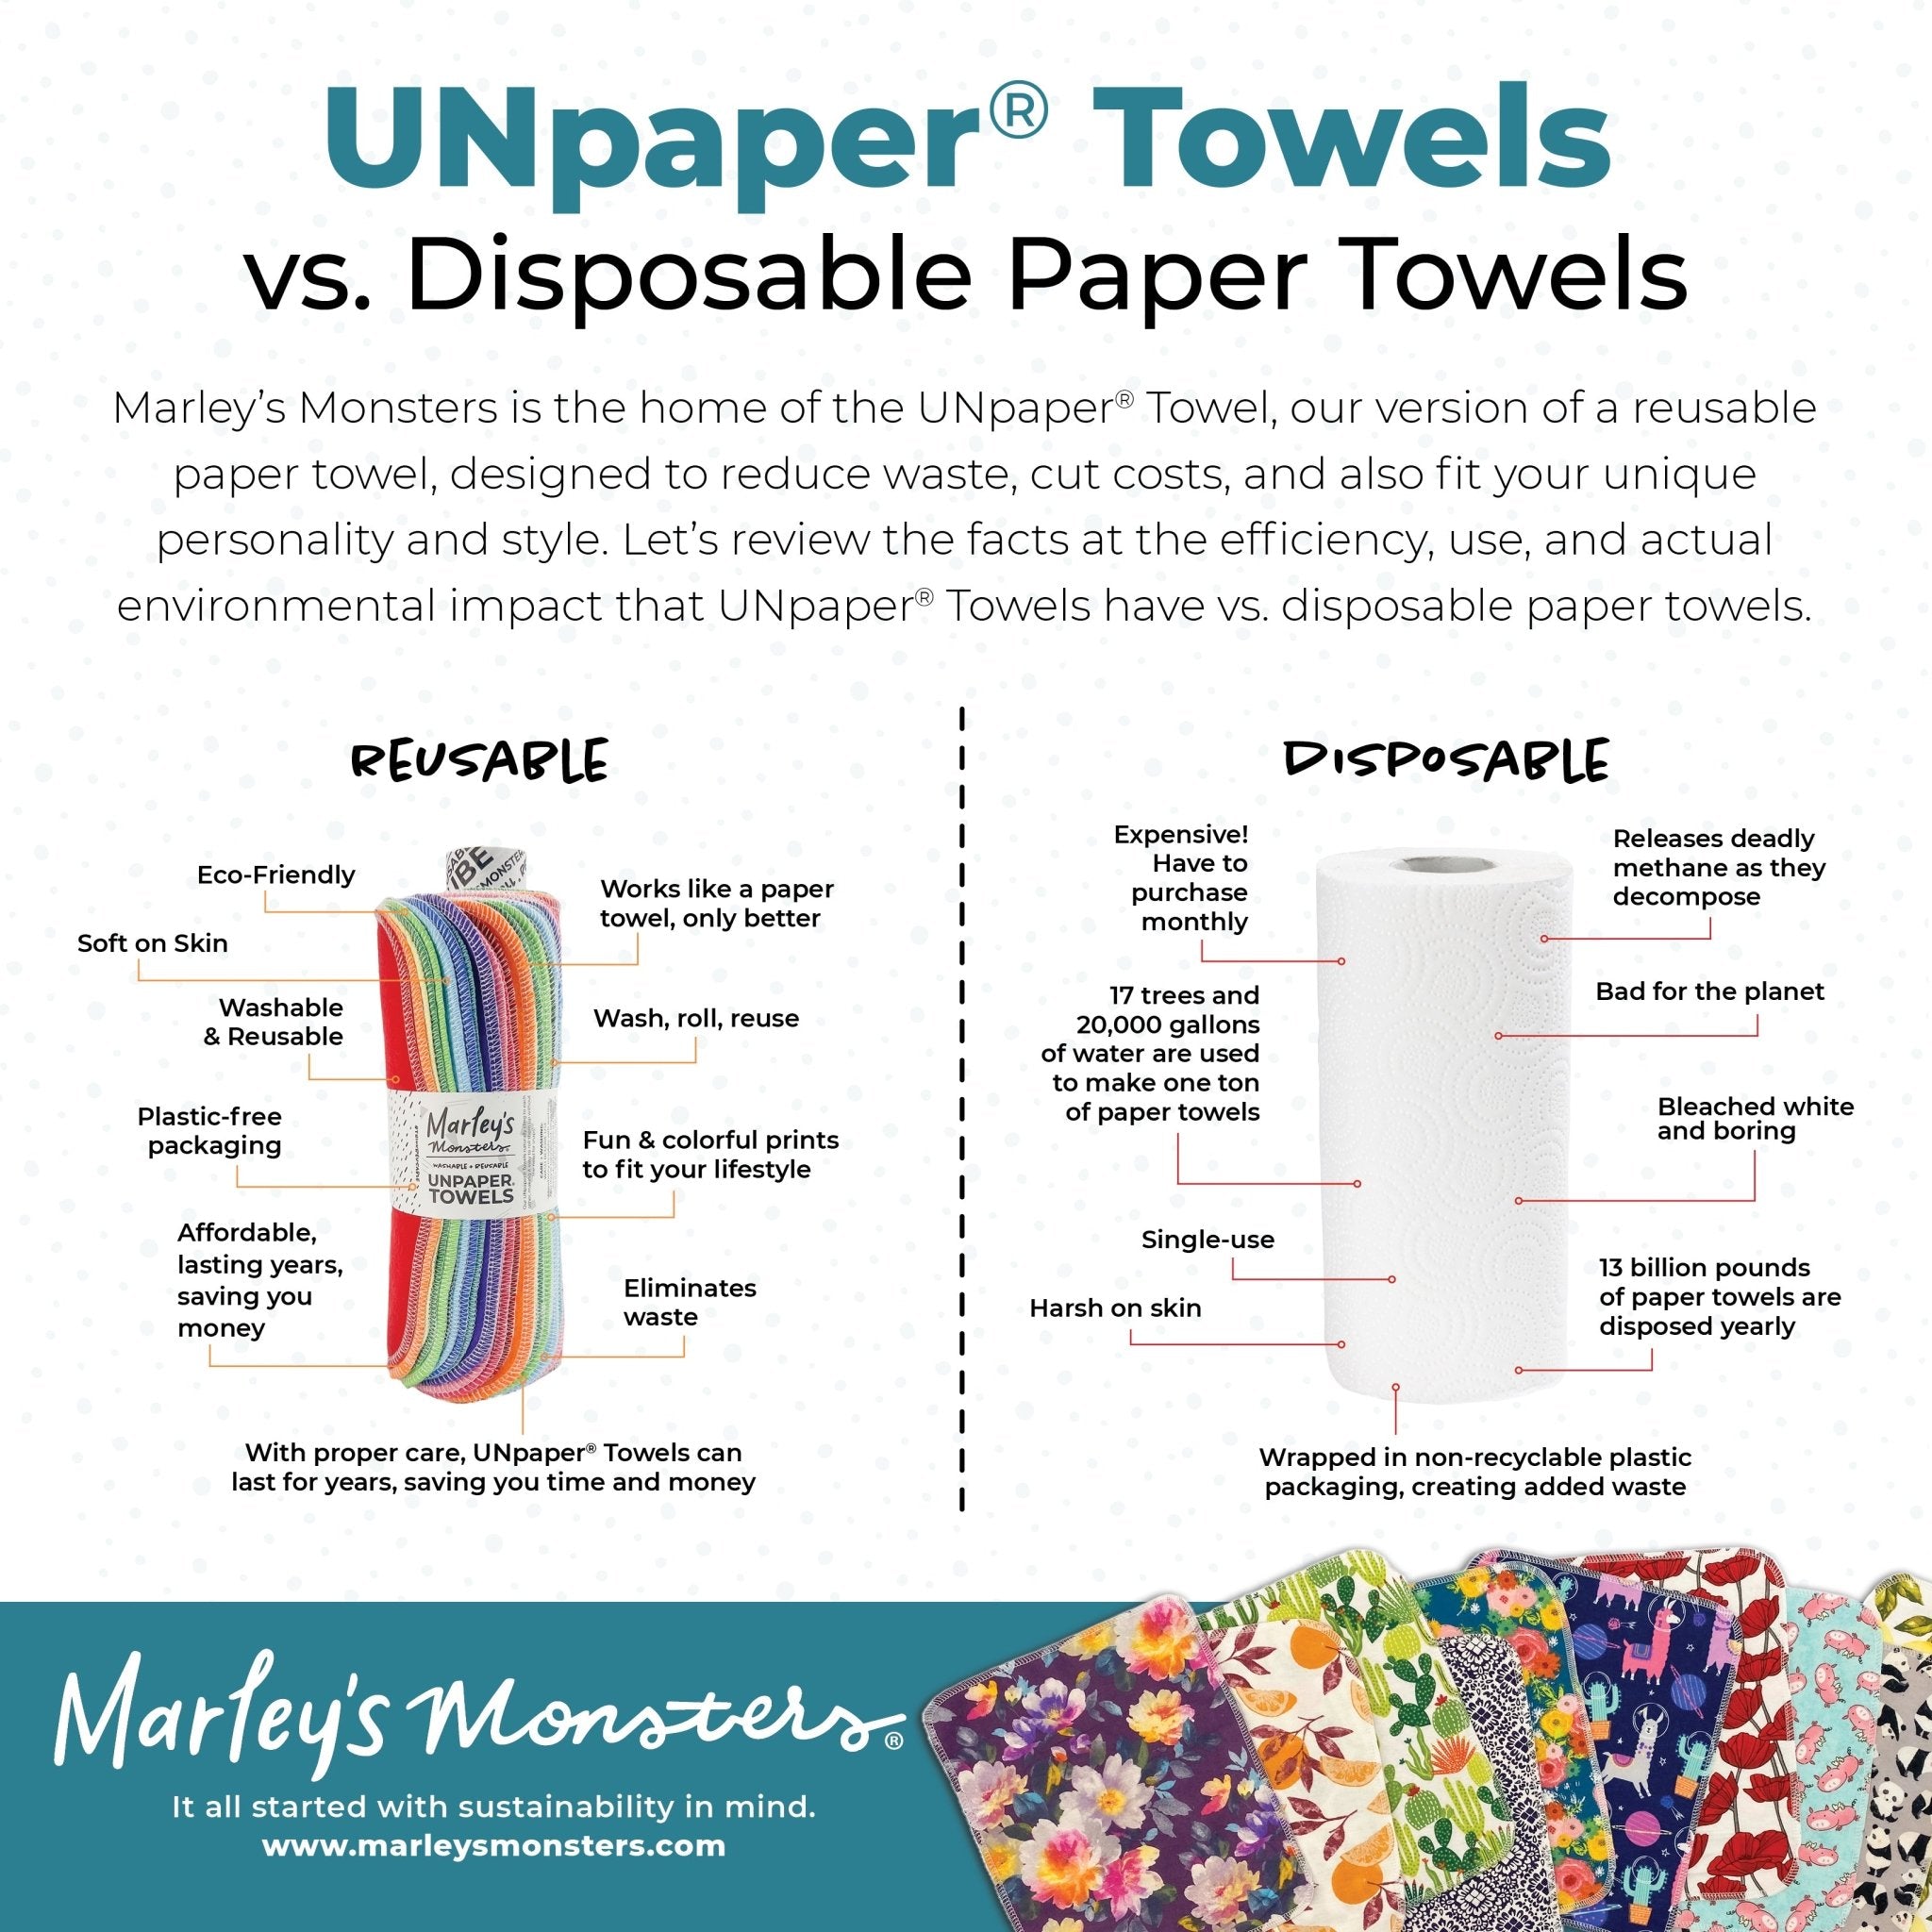 8 Pre-Rolled Single Ply Unpaper Towels – The Pear Co.